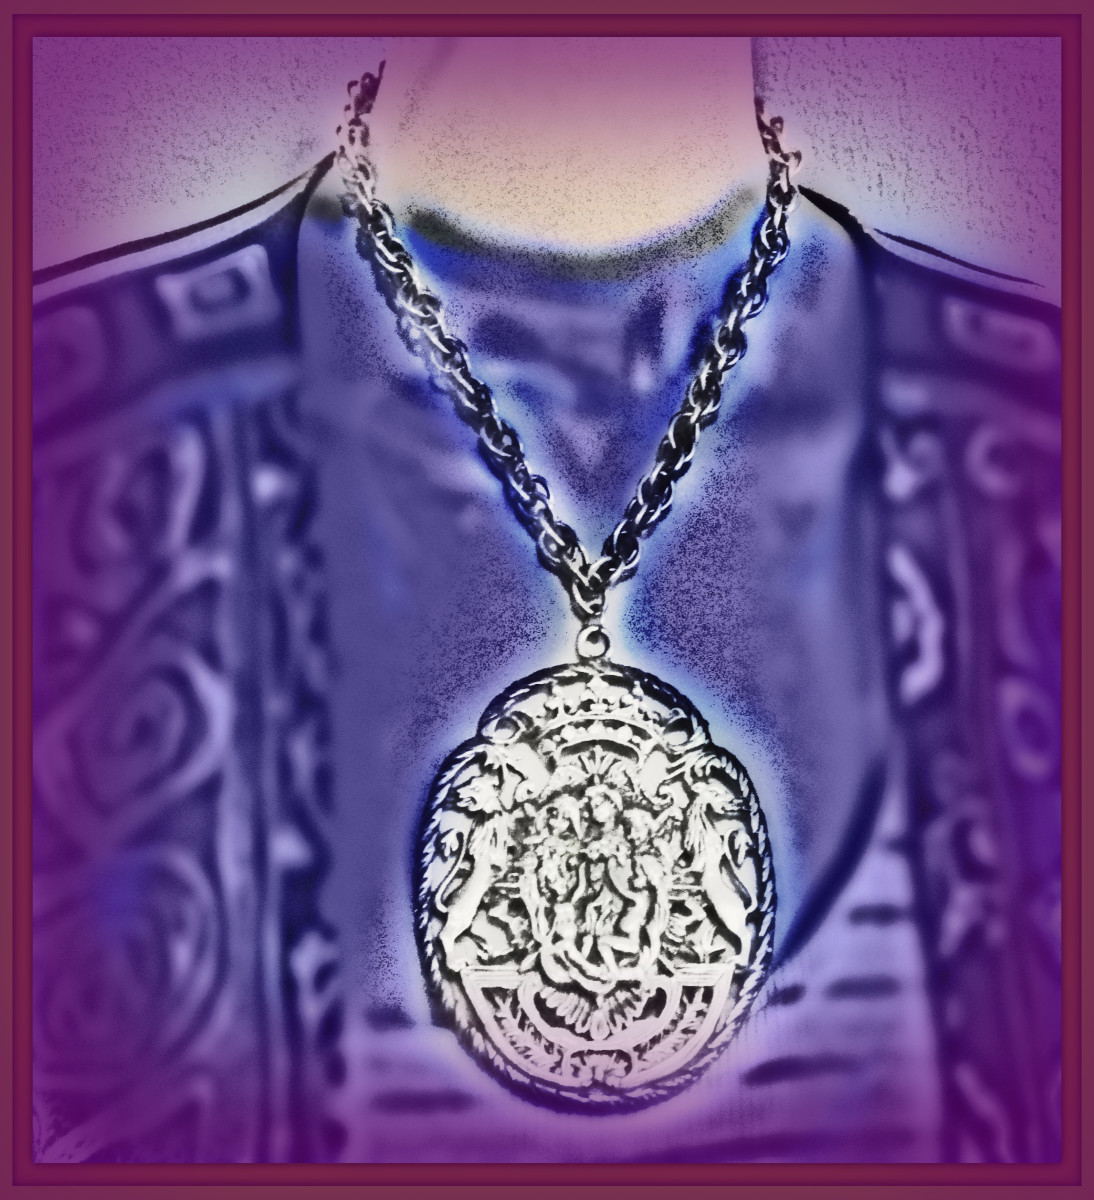  All the people are beautifully dressed and wearing silver necklaces, with a silver badge, or medallion in the center of their necklaces.